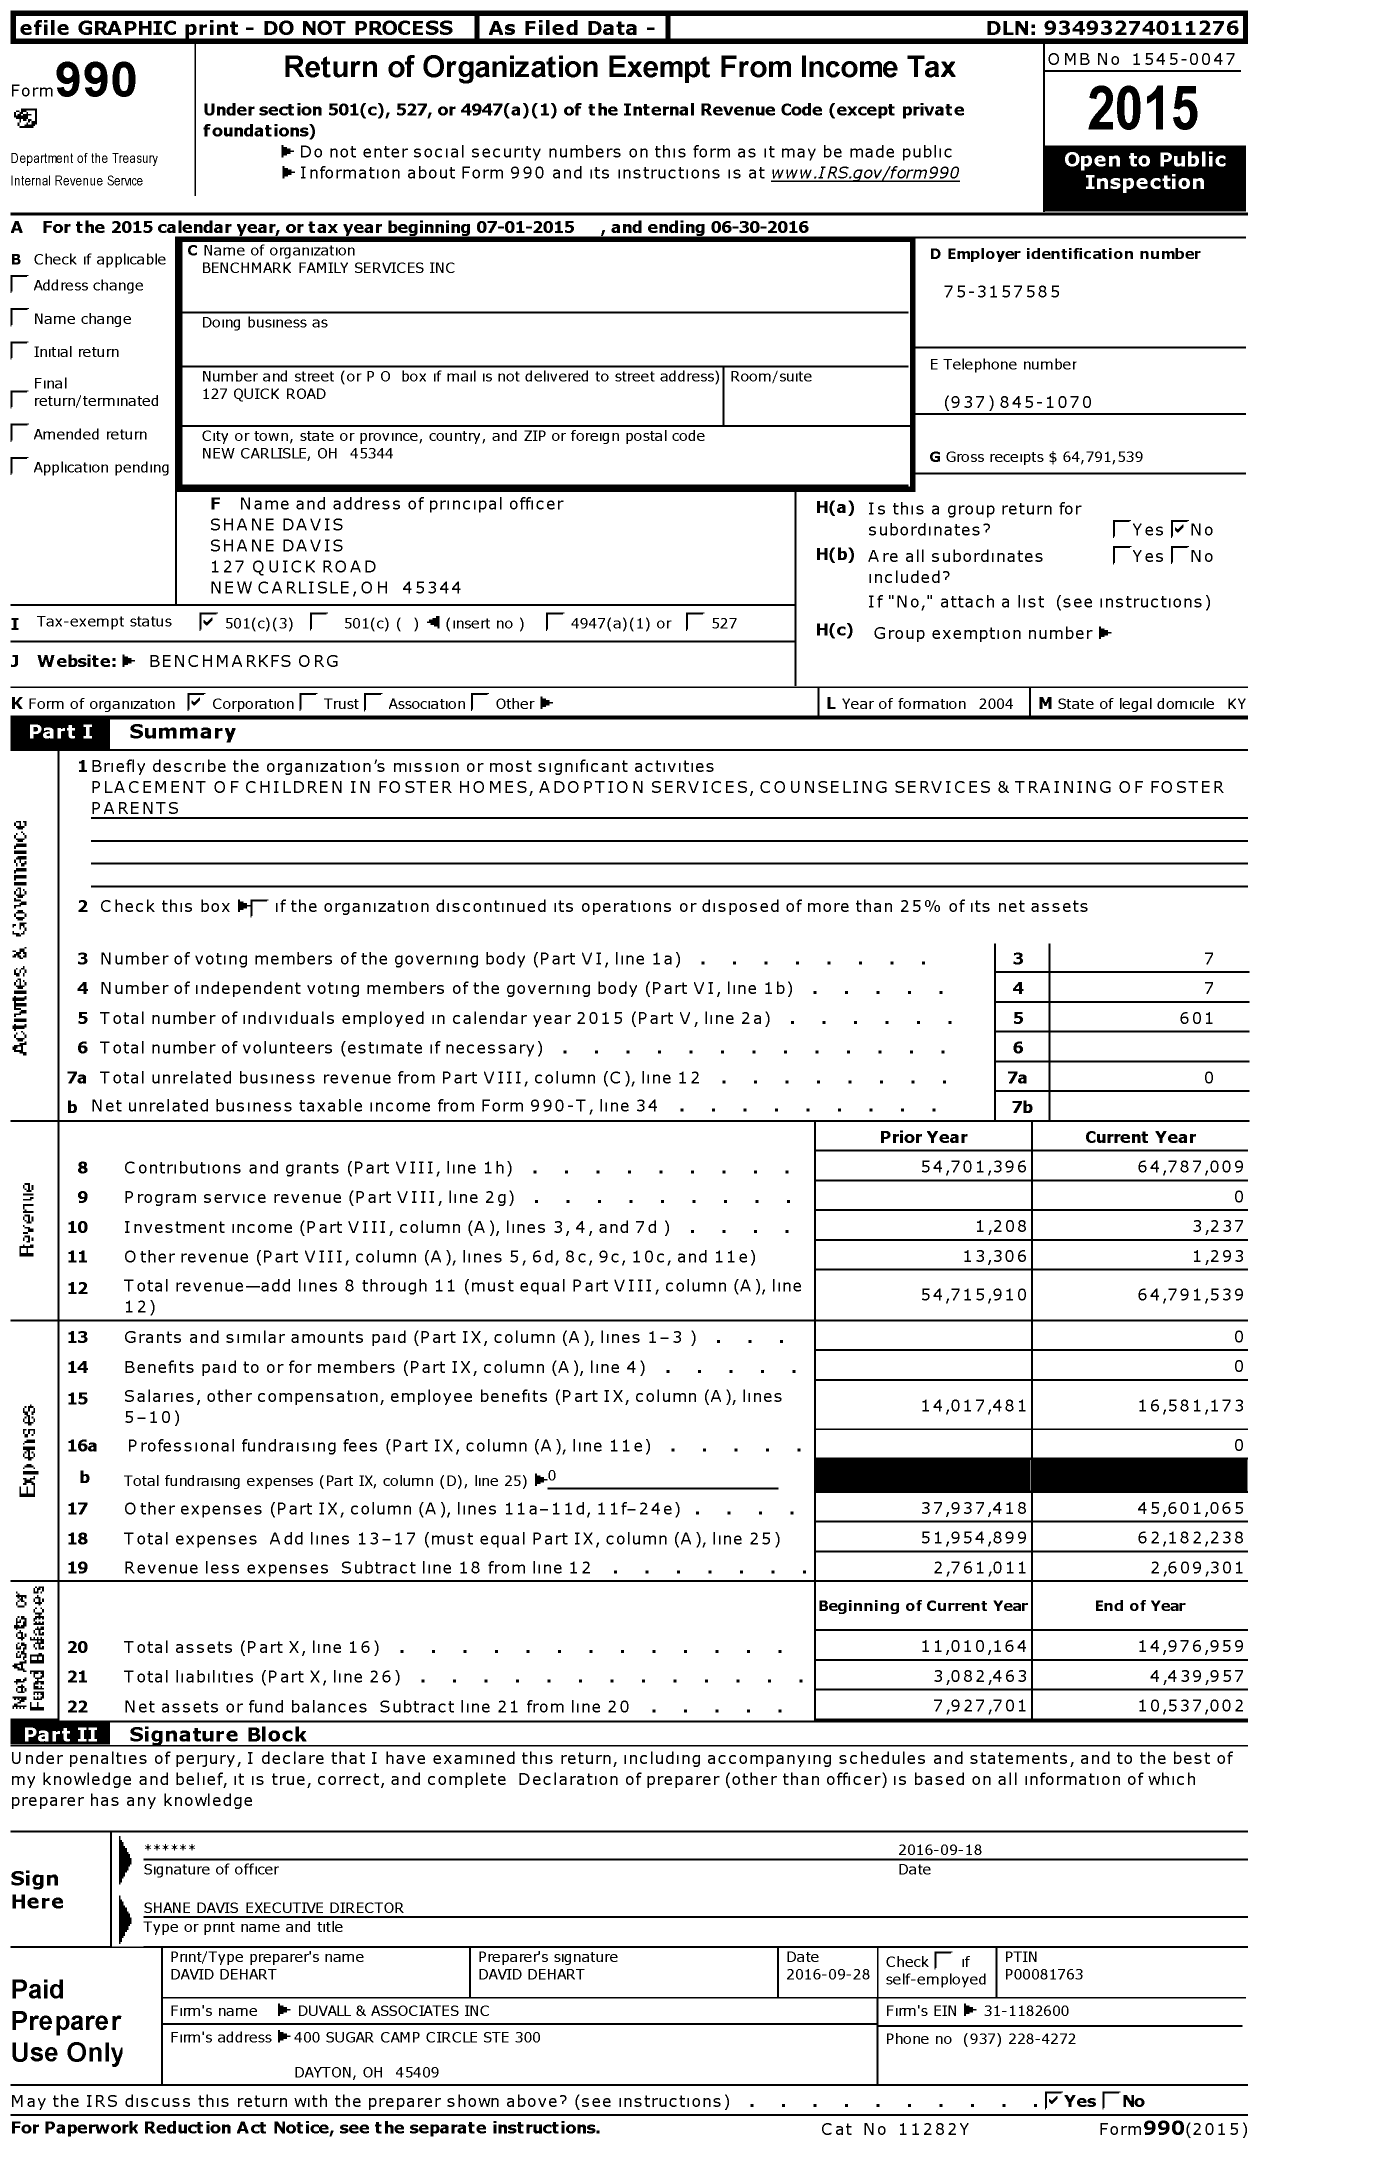 Image of first page of 2015 Form 990 for Benchmark Family Services